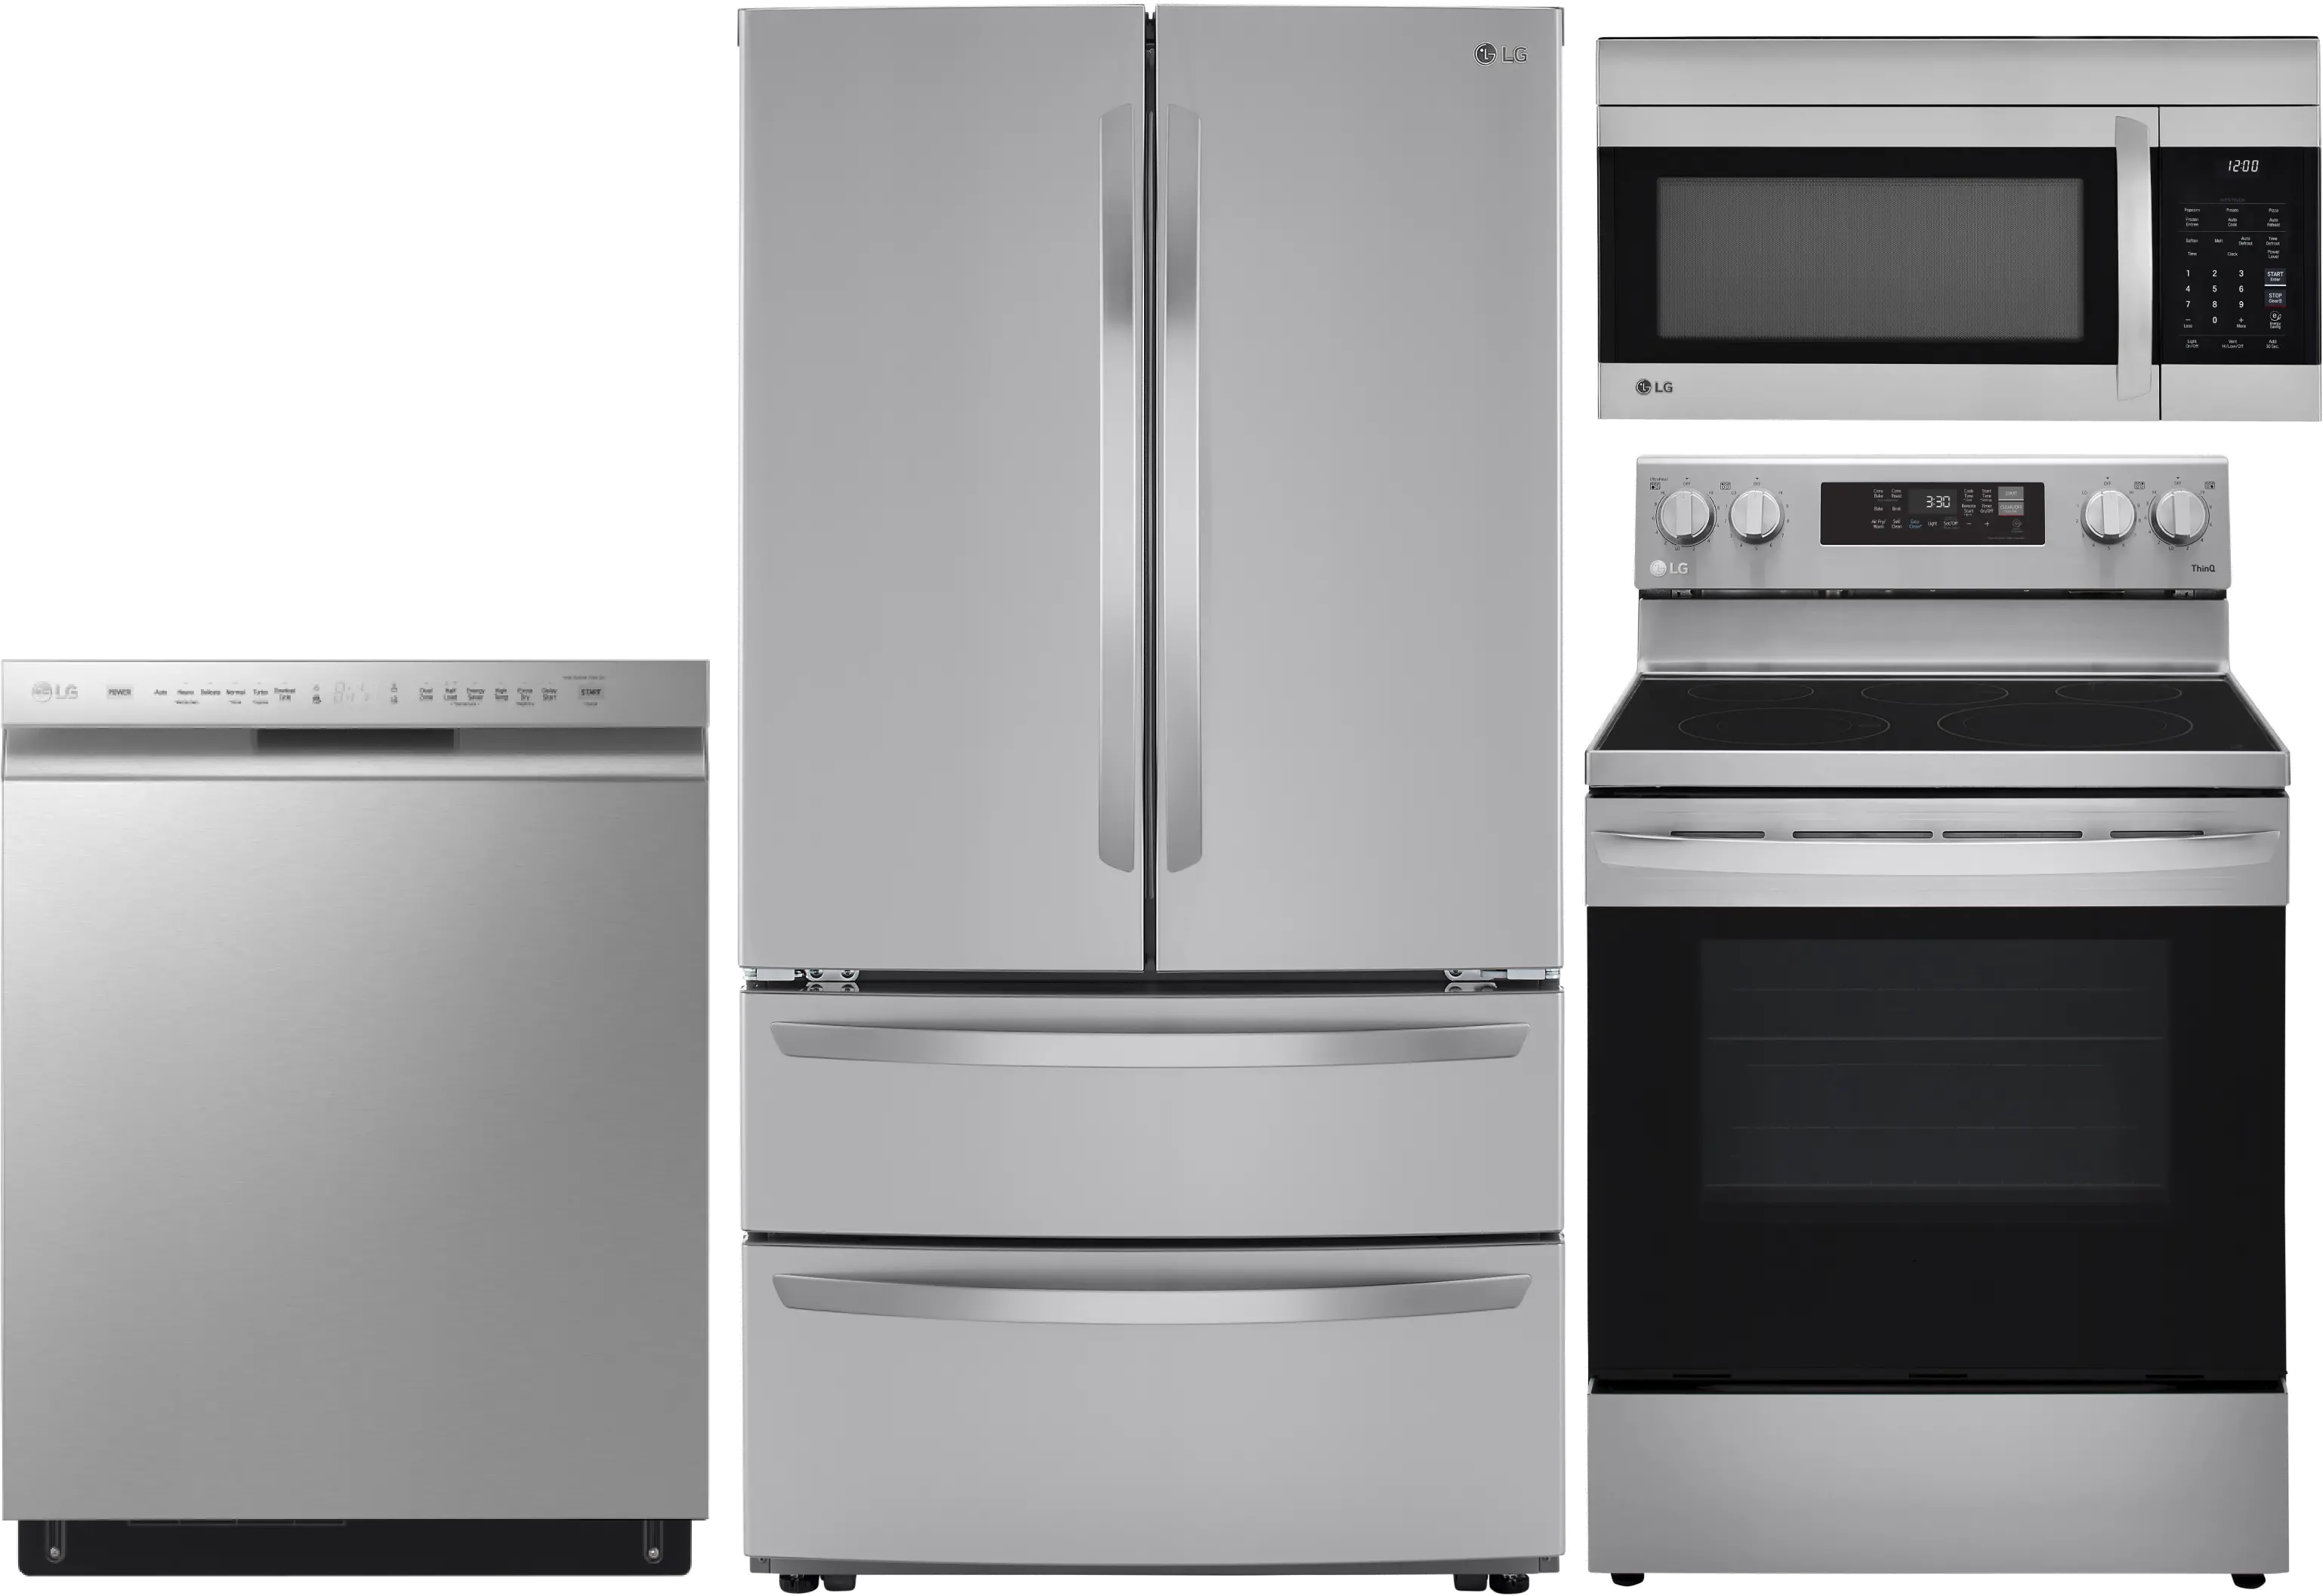 https://static.rcwilley.com/products/113329008/LG-4-Piece-Electric-Kitchen-Appliance-Package---Stainless-Steel-rcwilley-image1.webp